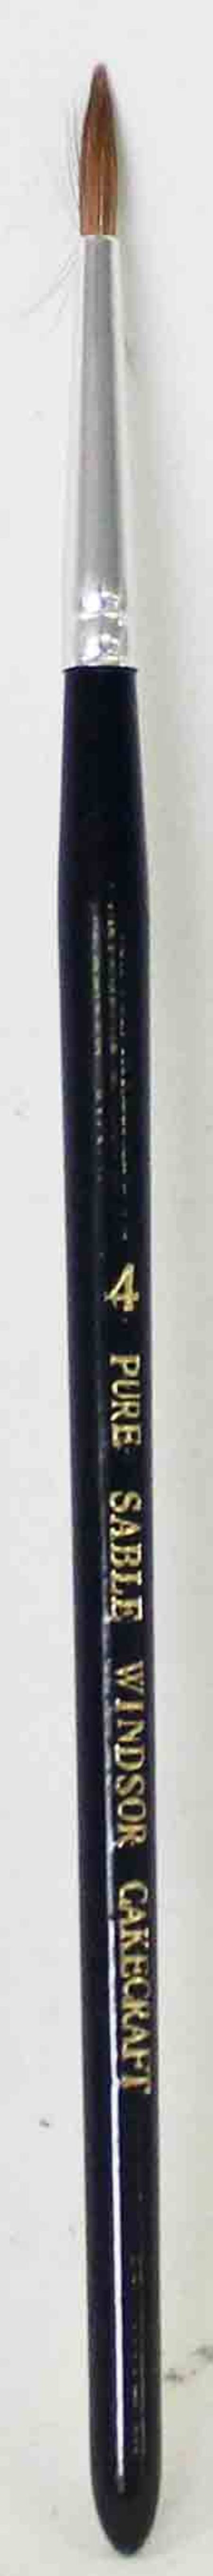 Buy Craft Brush - Sable - Size 4 in NZ. 